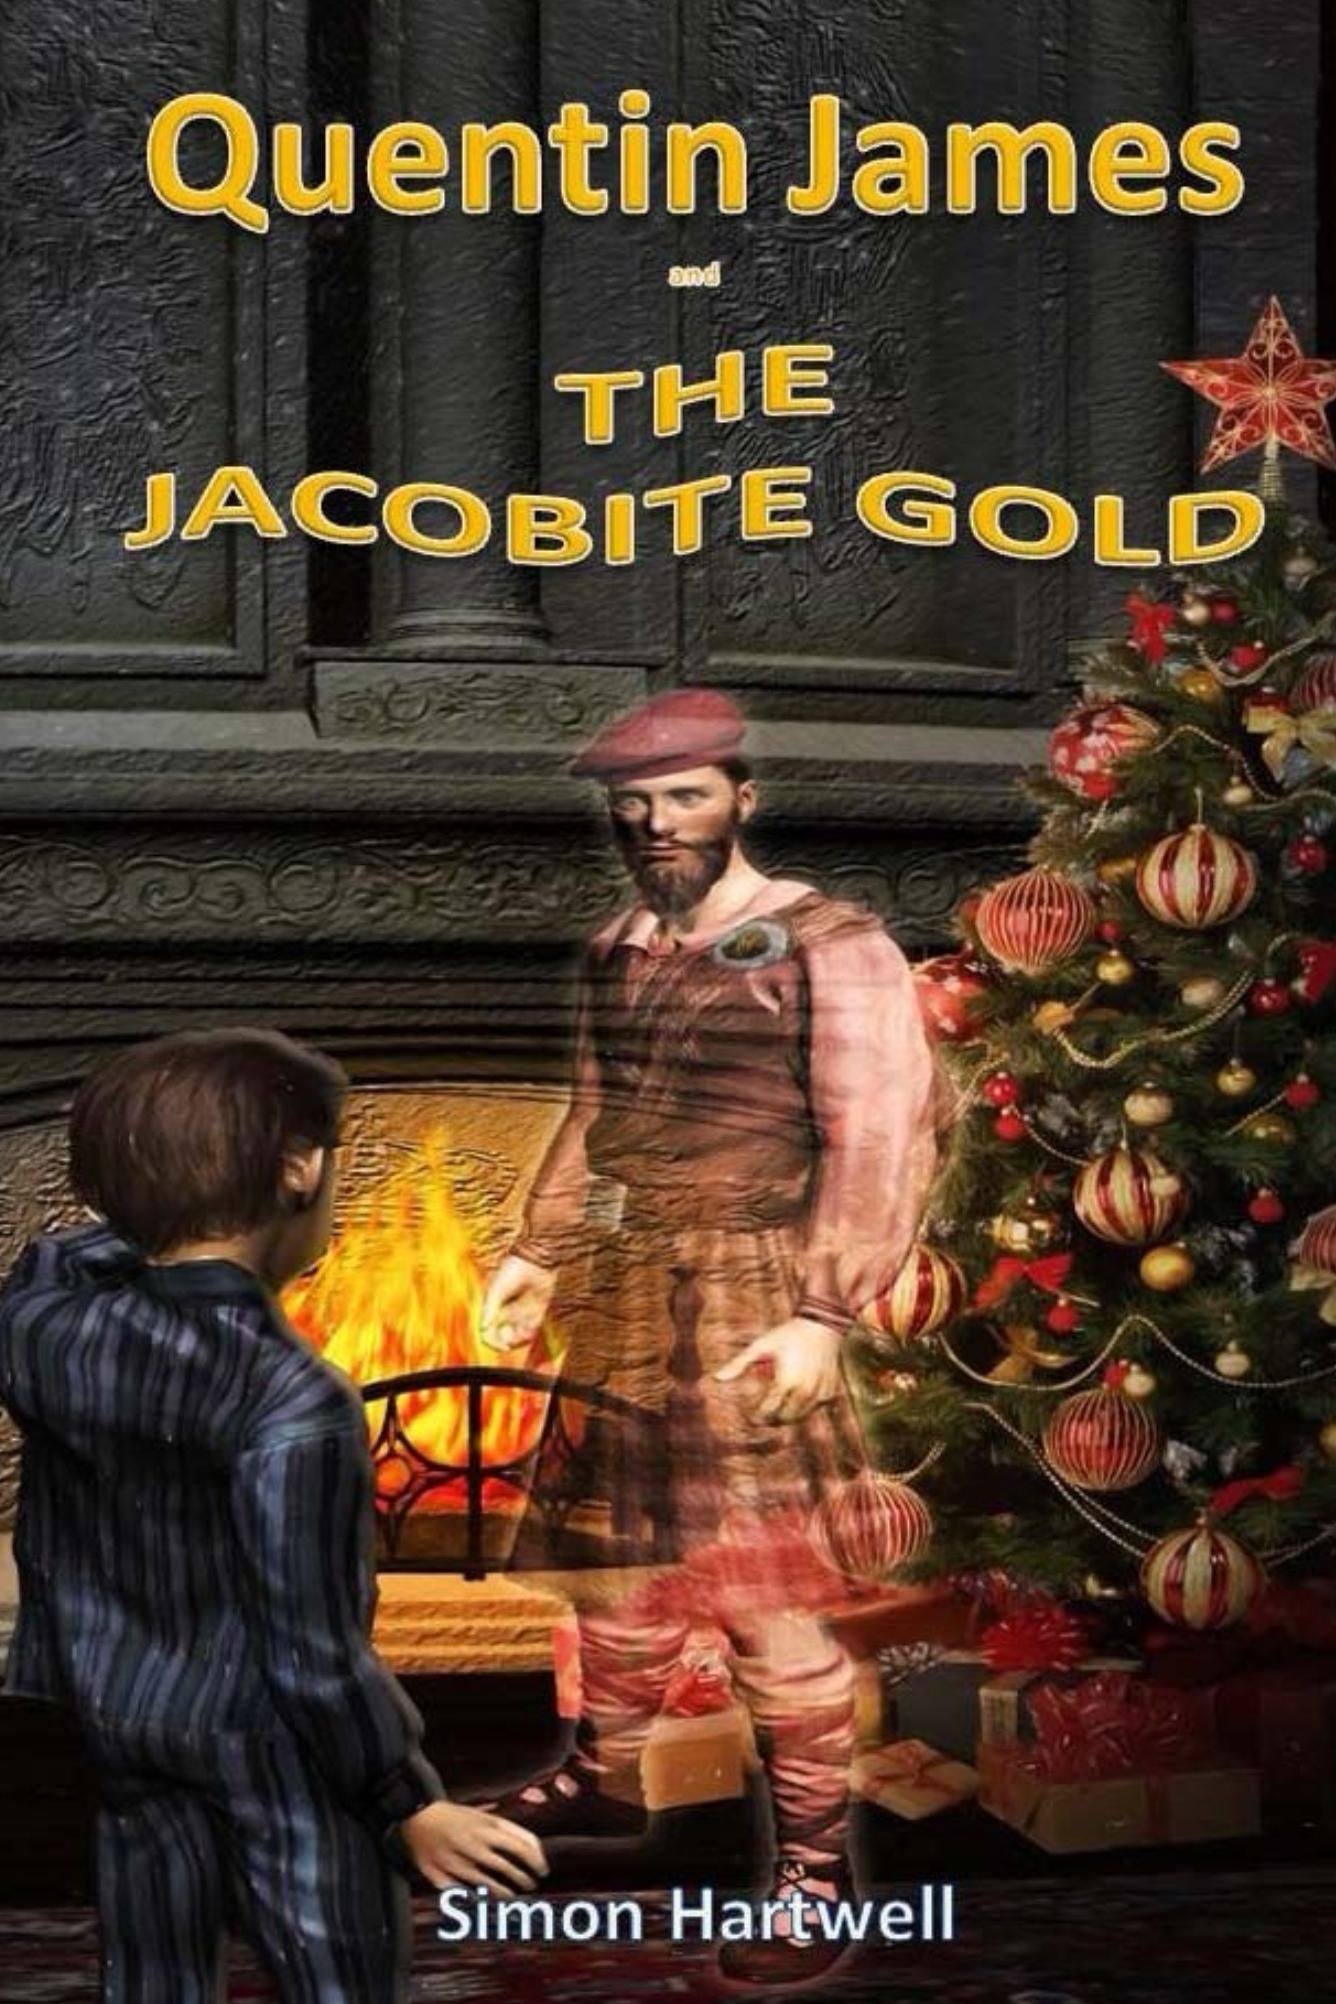 QUENTIN JAMES AND THE JACOBITE GOLD